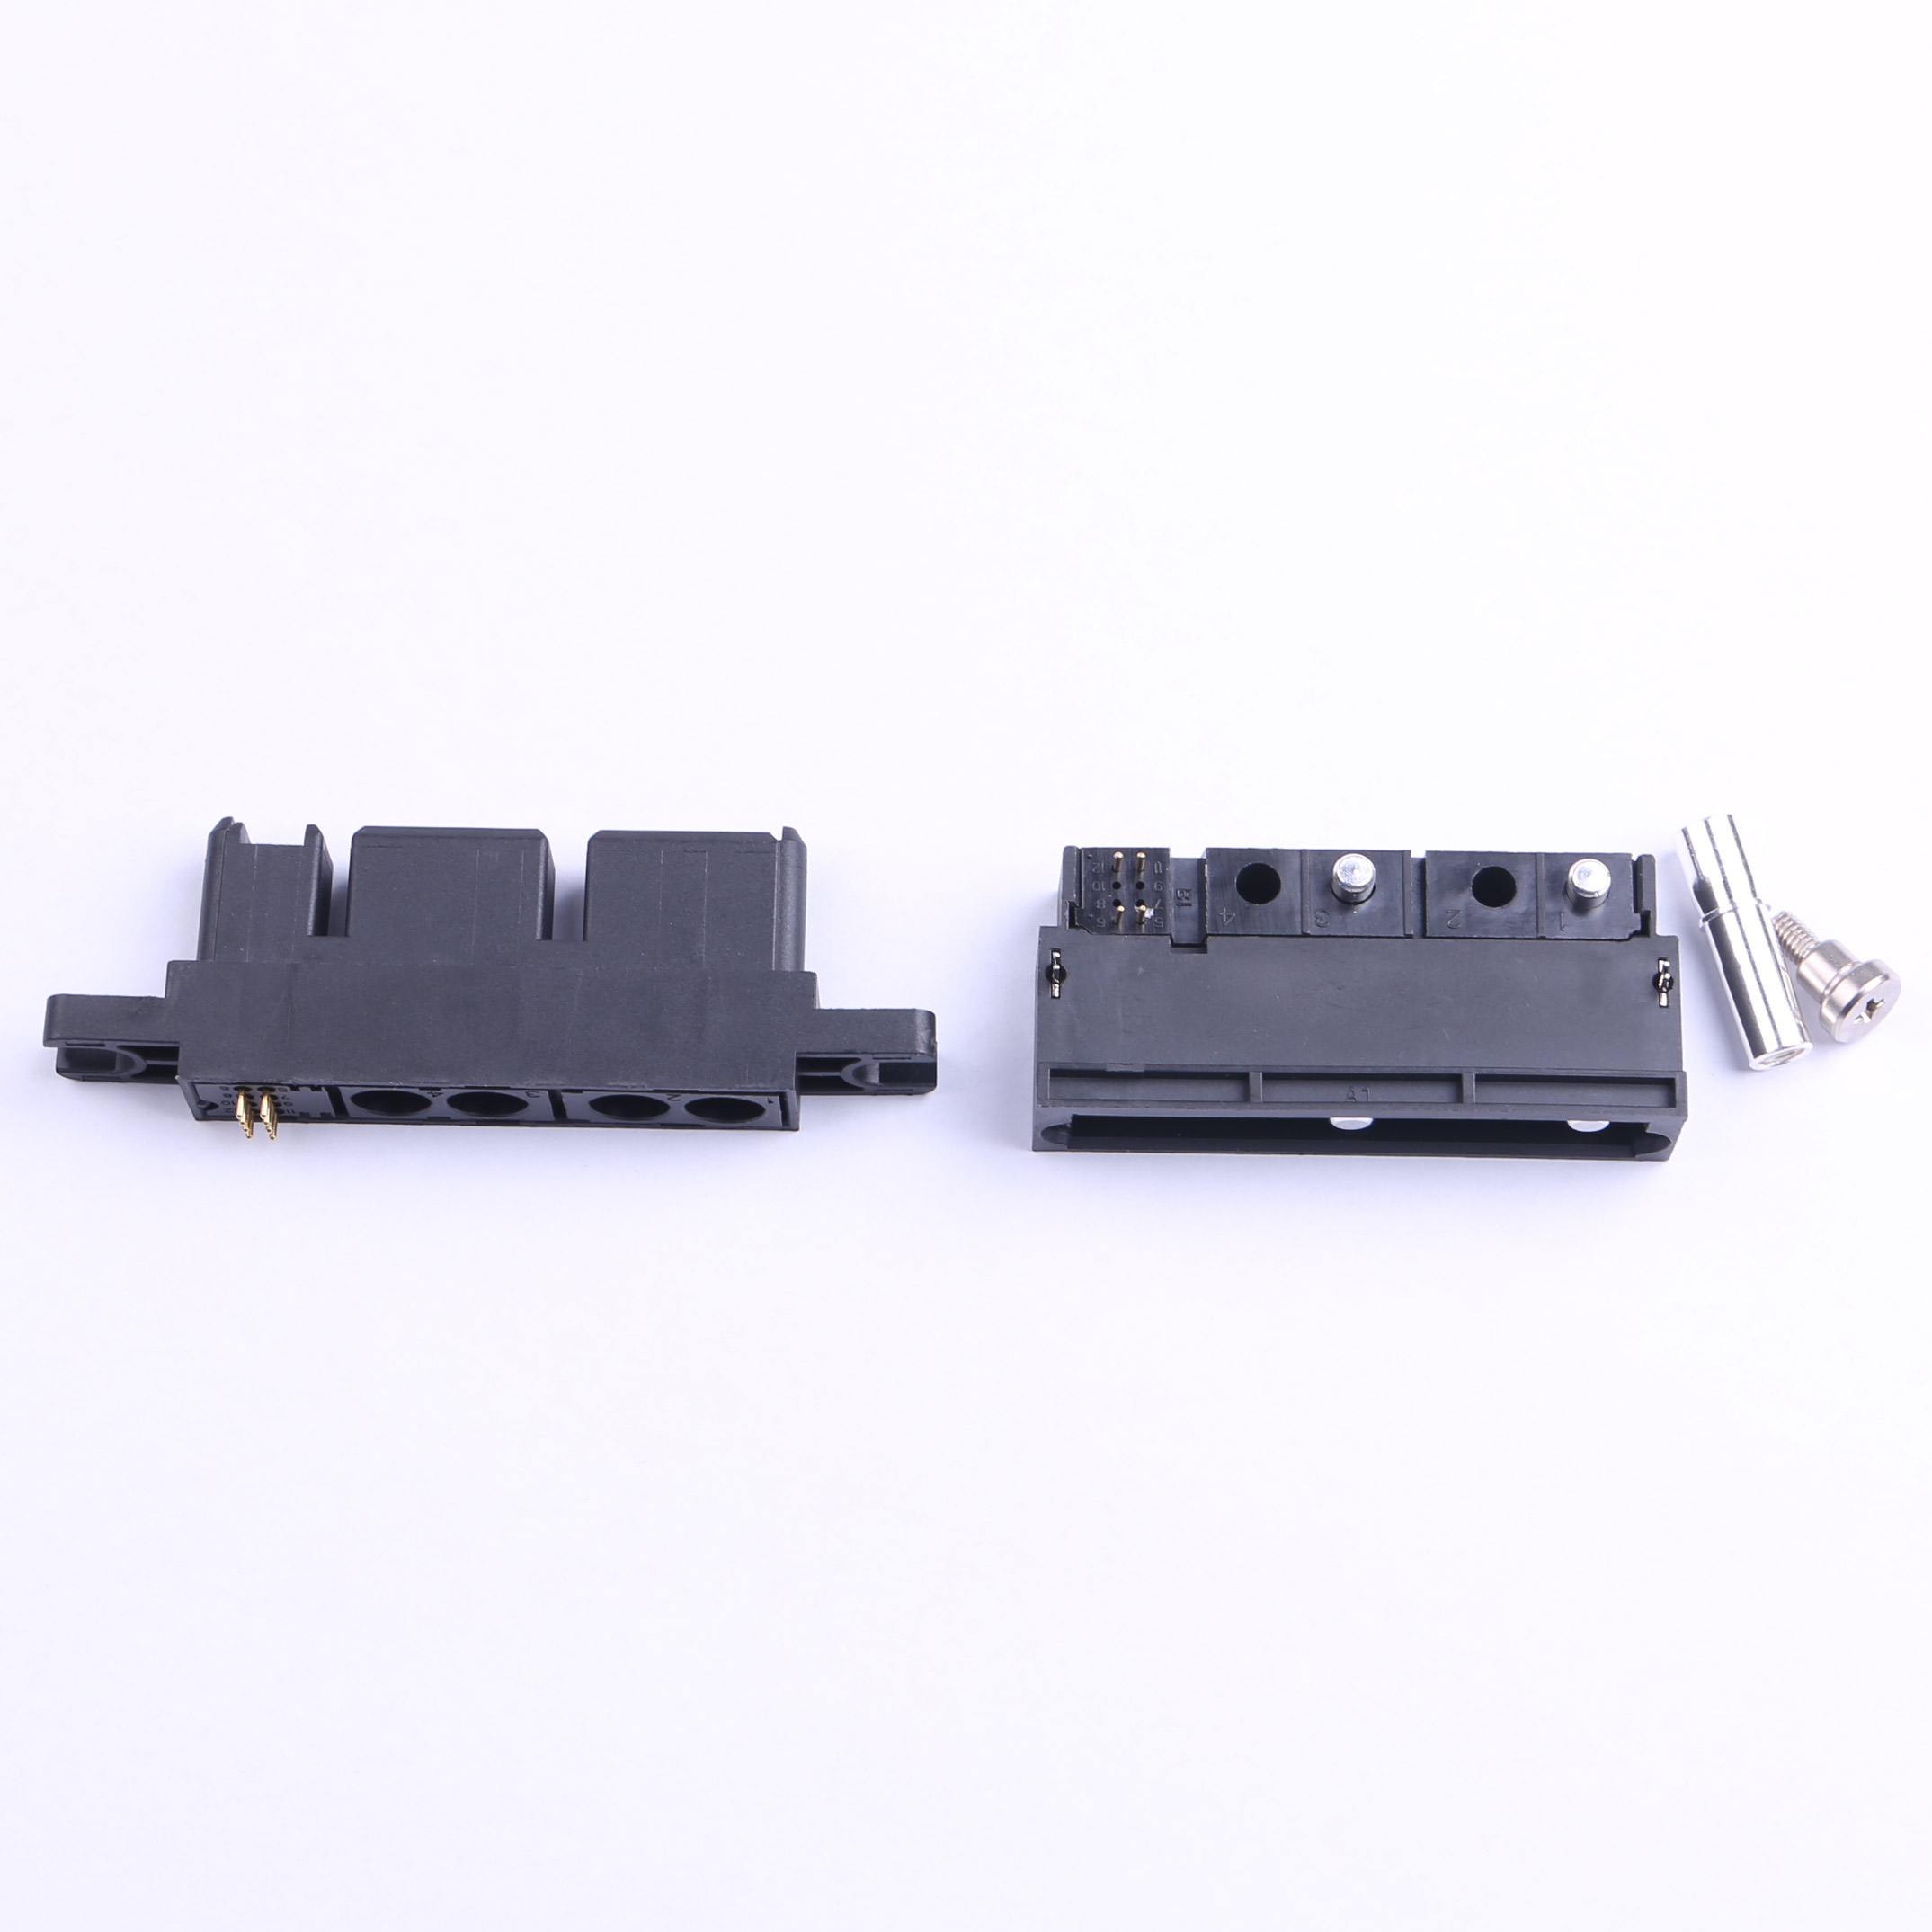 Kinghelm 12-core Power Connector for Charging station communication equipment- KH-DC-044B-2.0